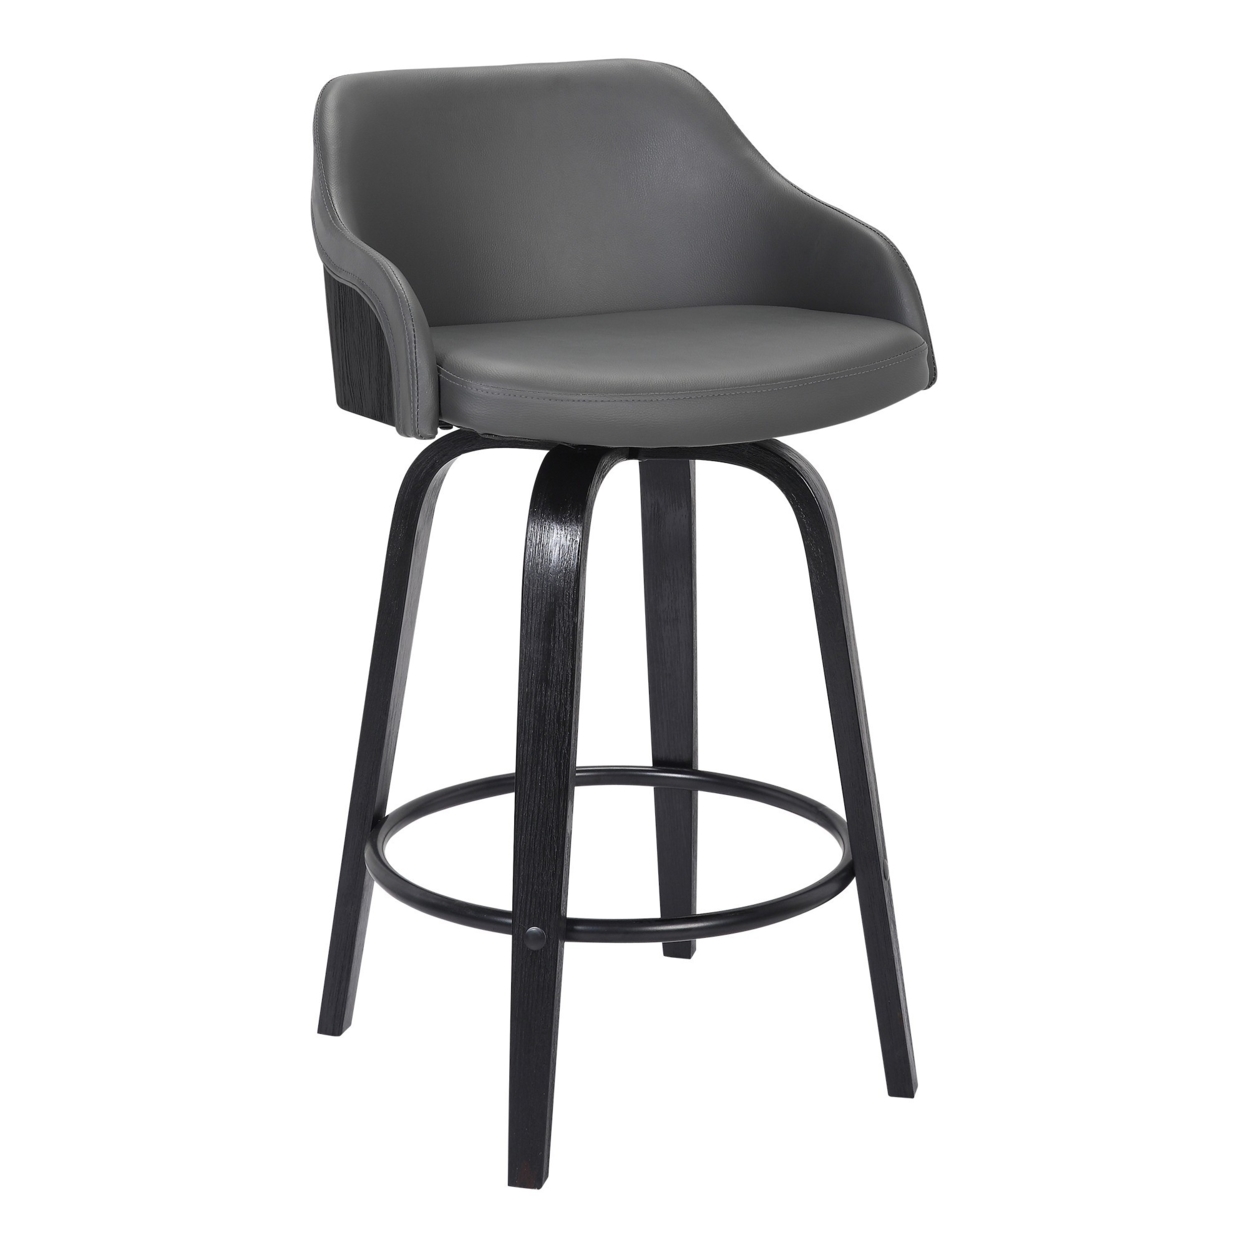 26 Inch Wooden And Leatherette Swivel Barstool, Black And Gray- Saltoro Sherpi